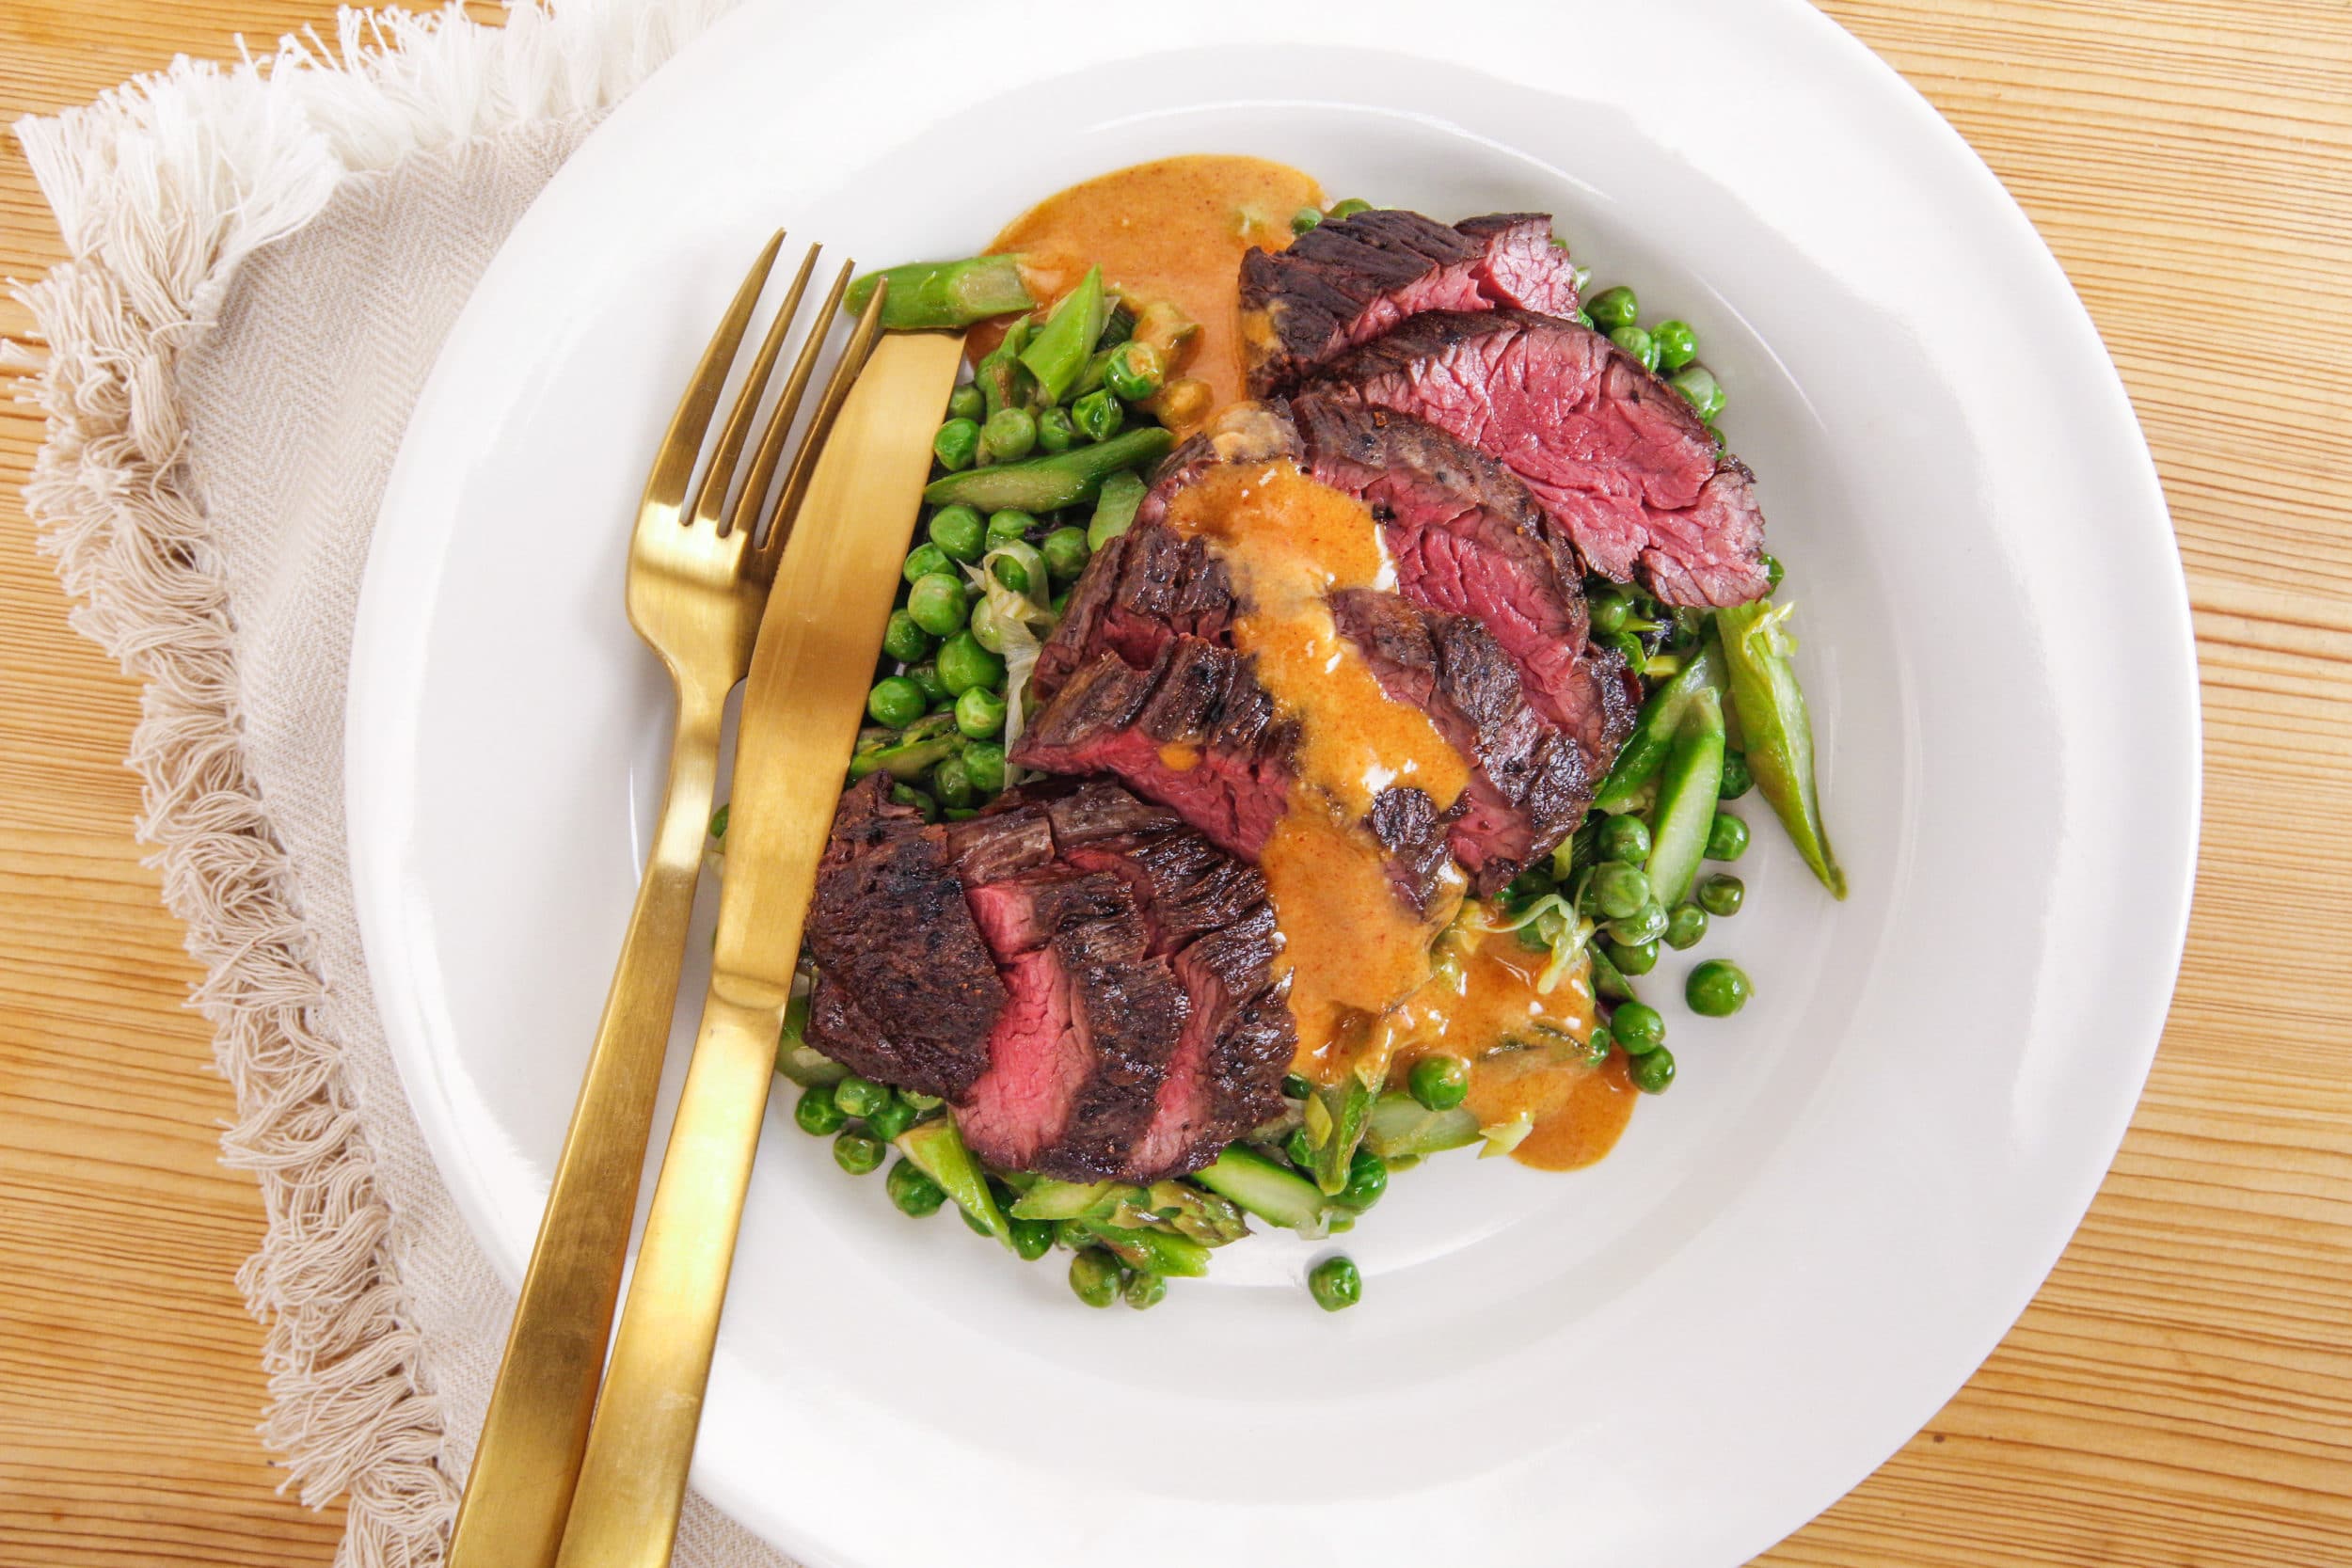 Rachael's Sliced Hanger Steak with Smoky Mustard Dressing and Spring Vegetables with Shallots and Greens